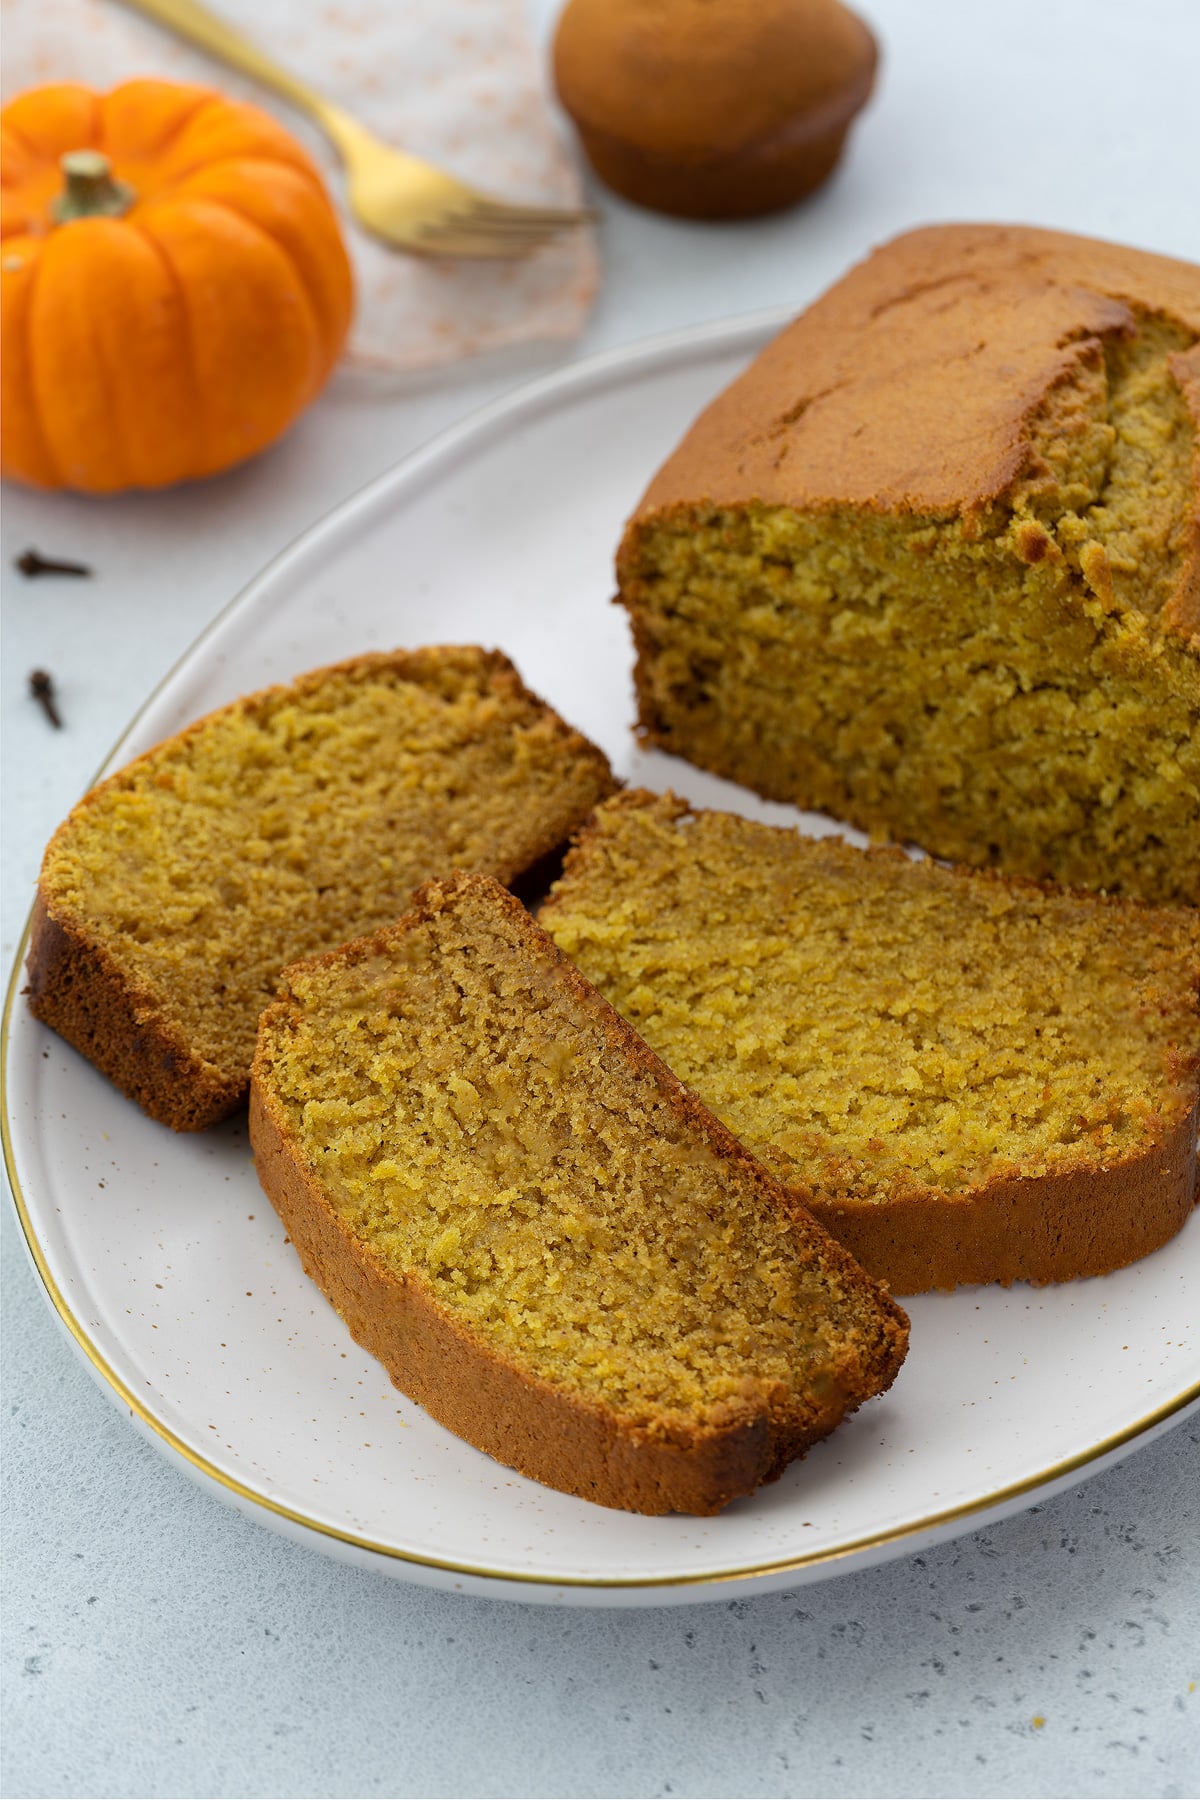 Three slices of pumpkin bread on an oval white plate on a white table, with a small pumpkin, pumpkin cup cake, and a golden fork placed nearby.